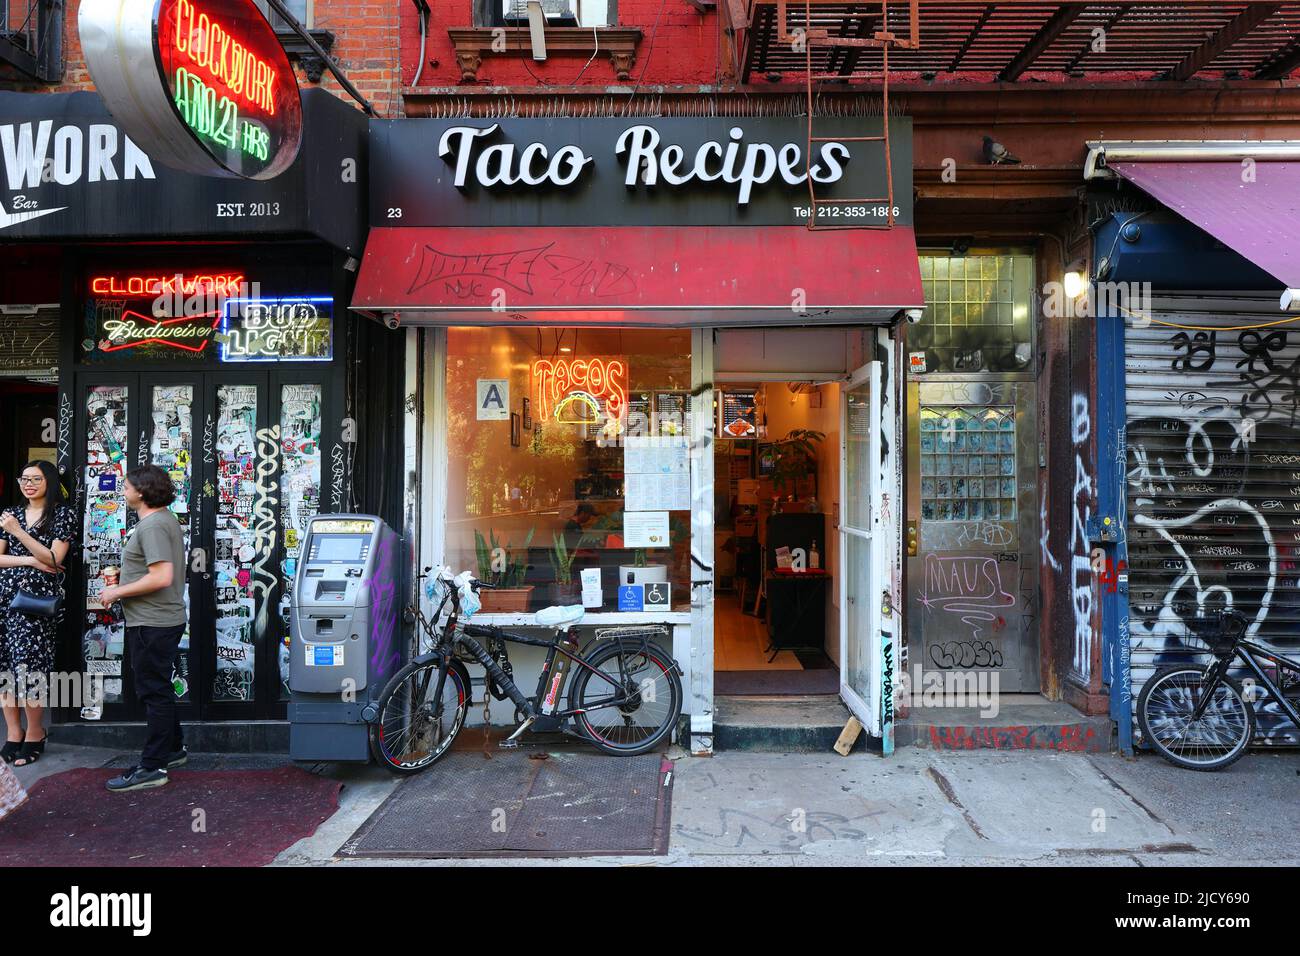 Taco Recipes, 23 Essex St, New York, NYC storefront photo of a Tex-Mex restaurant in the Lower East Side in Manhattan. Stock Photo